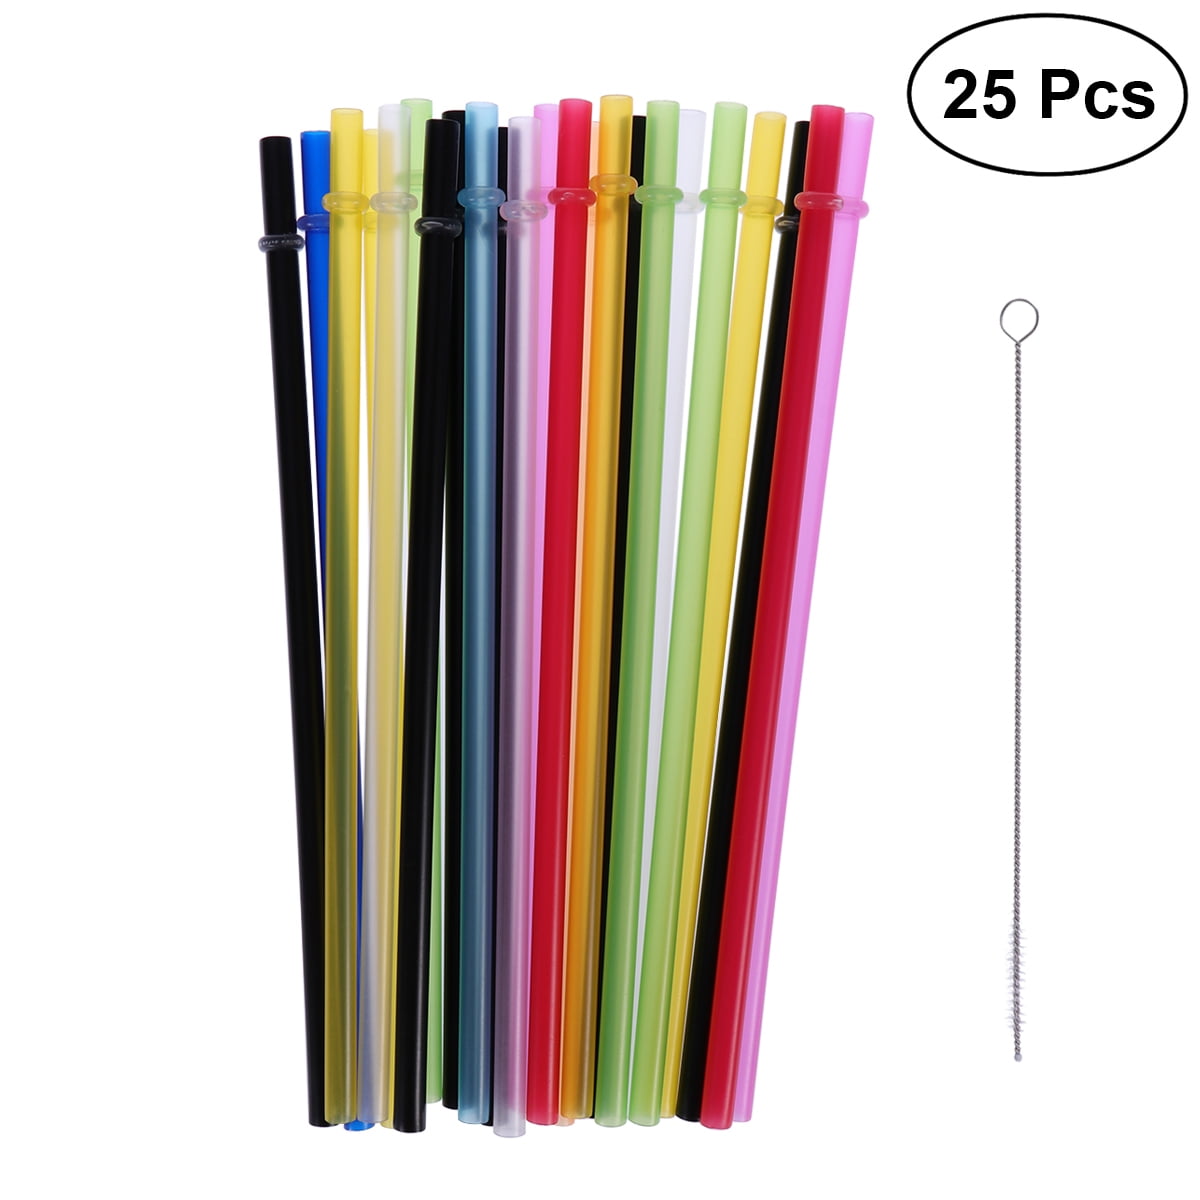 (purecolor) - 25pcs Pure Colour Reusable Plastic Thick Drinking Straws Mason Jar Straws for Party or Home Use with Brush